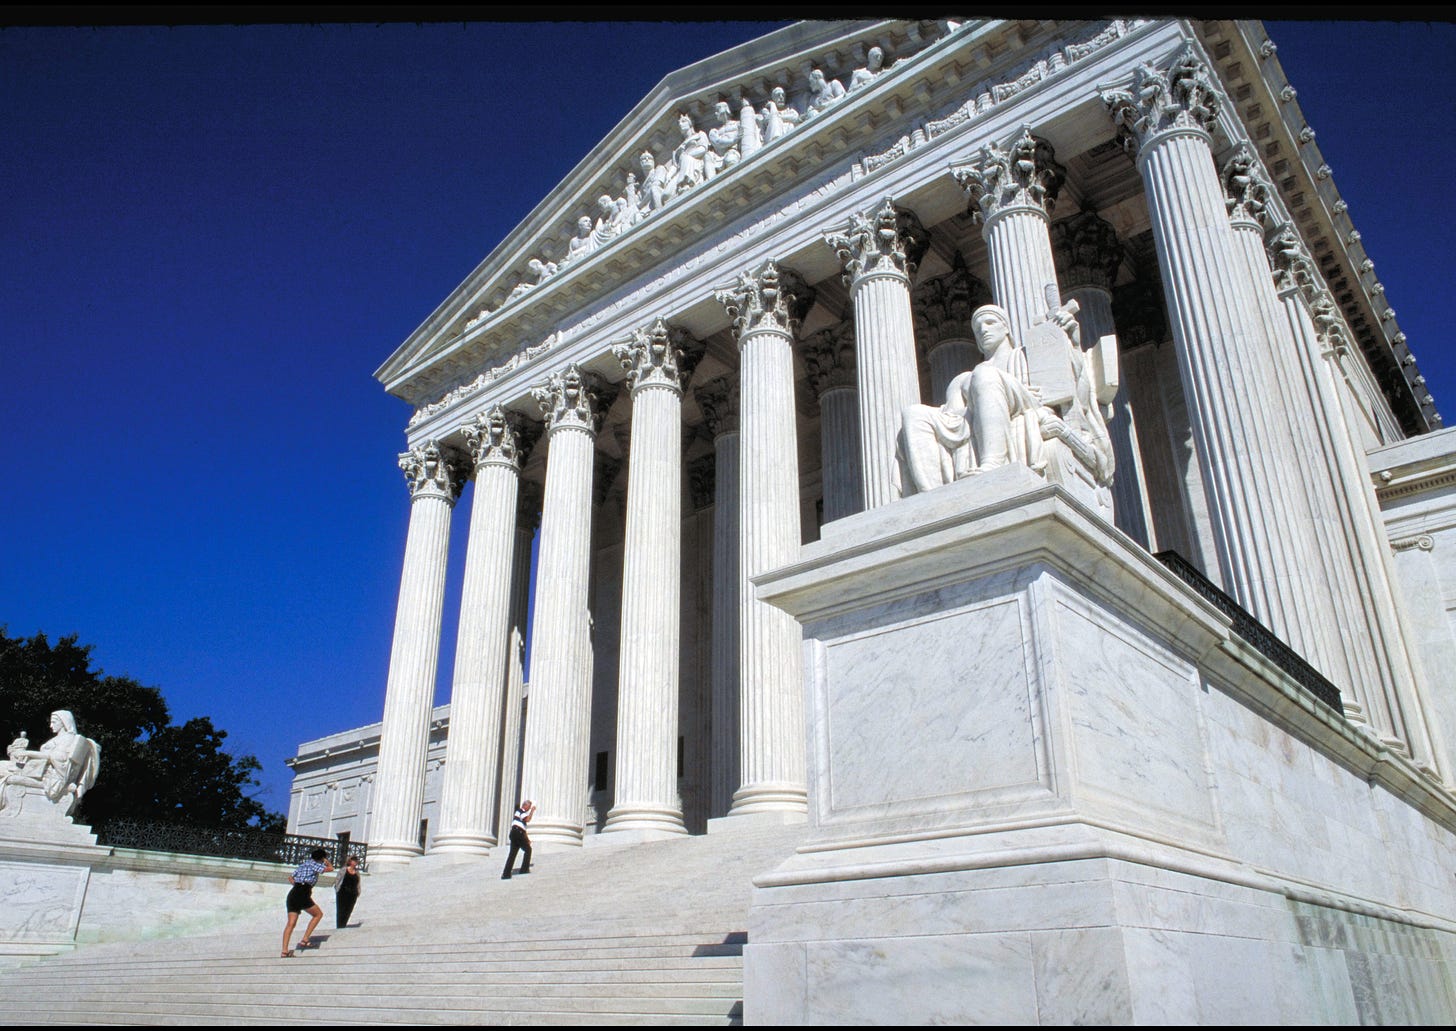 The building facade of the US Supreme Court